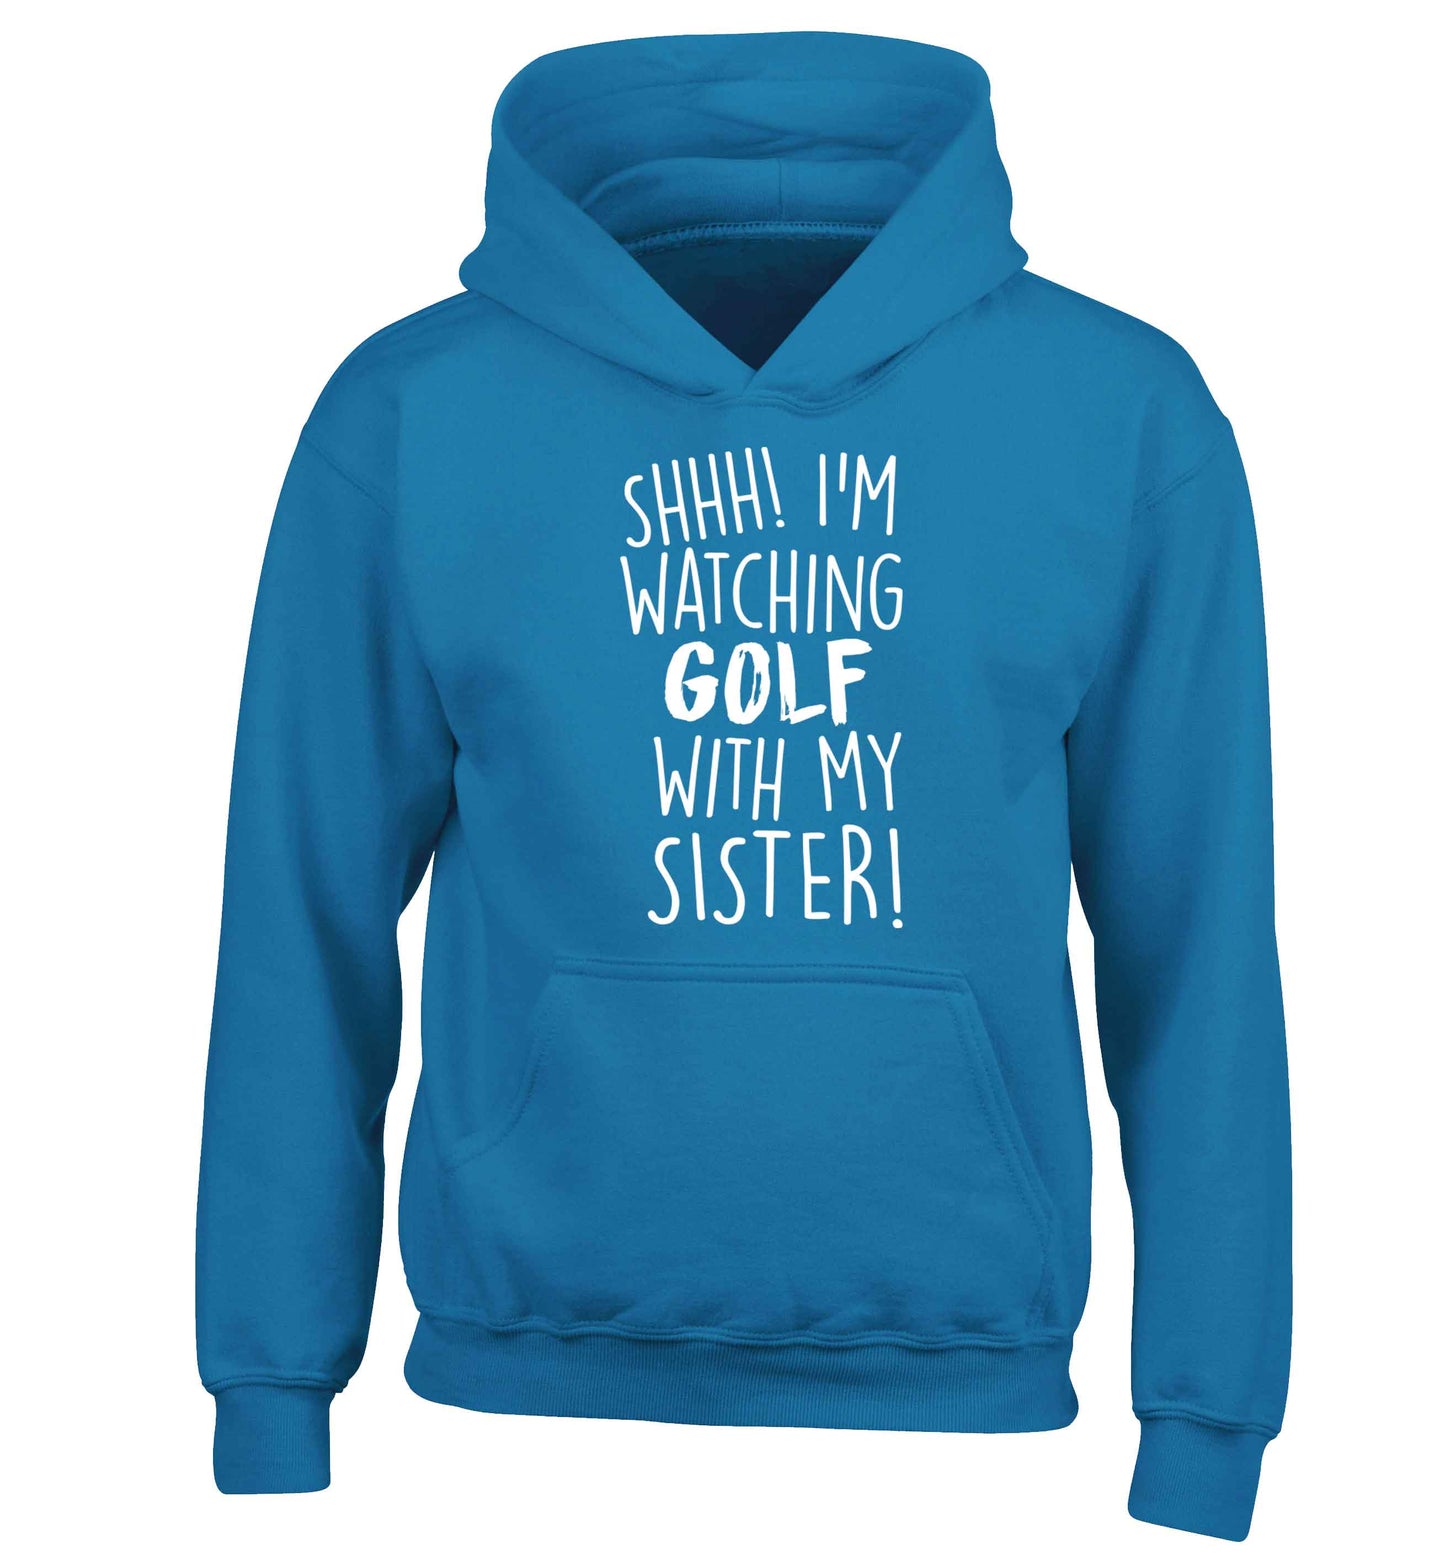 Shh I'm watching golf with my sister children's blue hoodie 12-13 Years